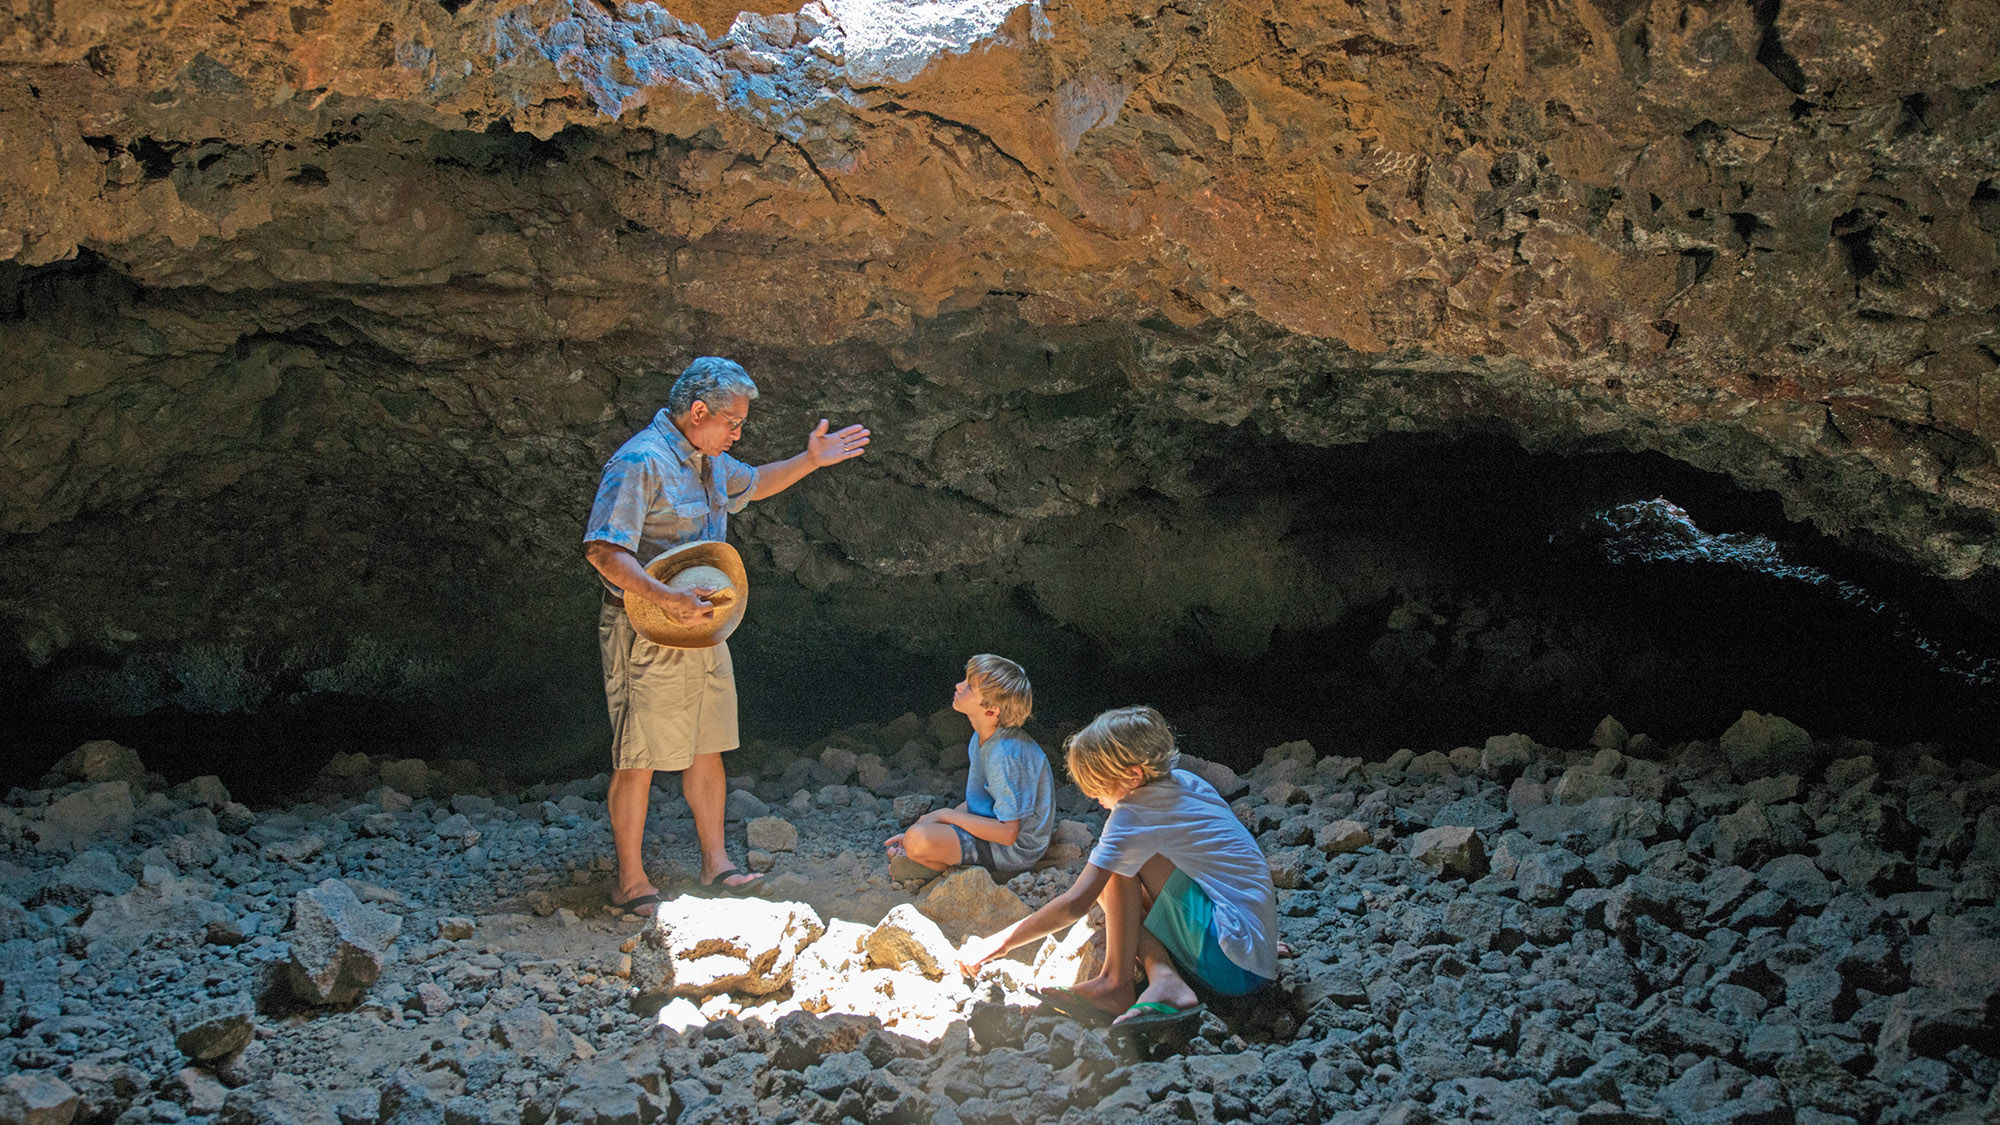 Children engage in a cave exploration as part of the programming at Mauna Lani, Auberge Resorts Collection.